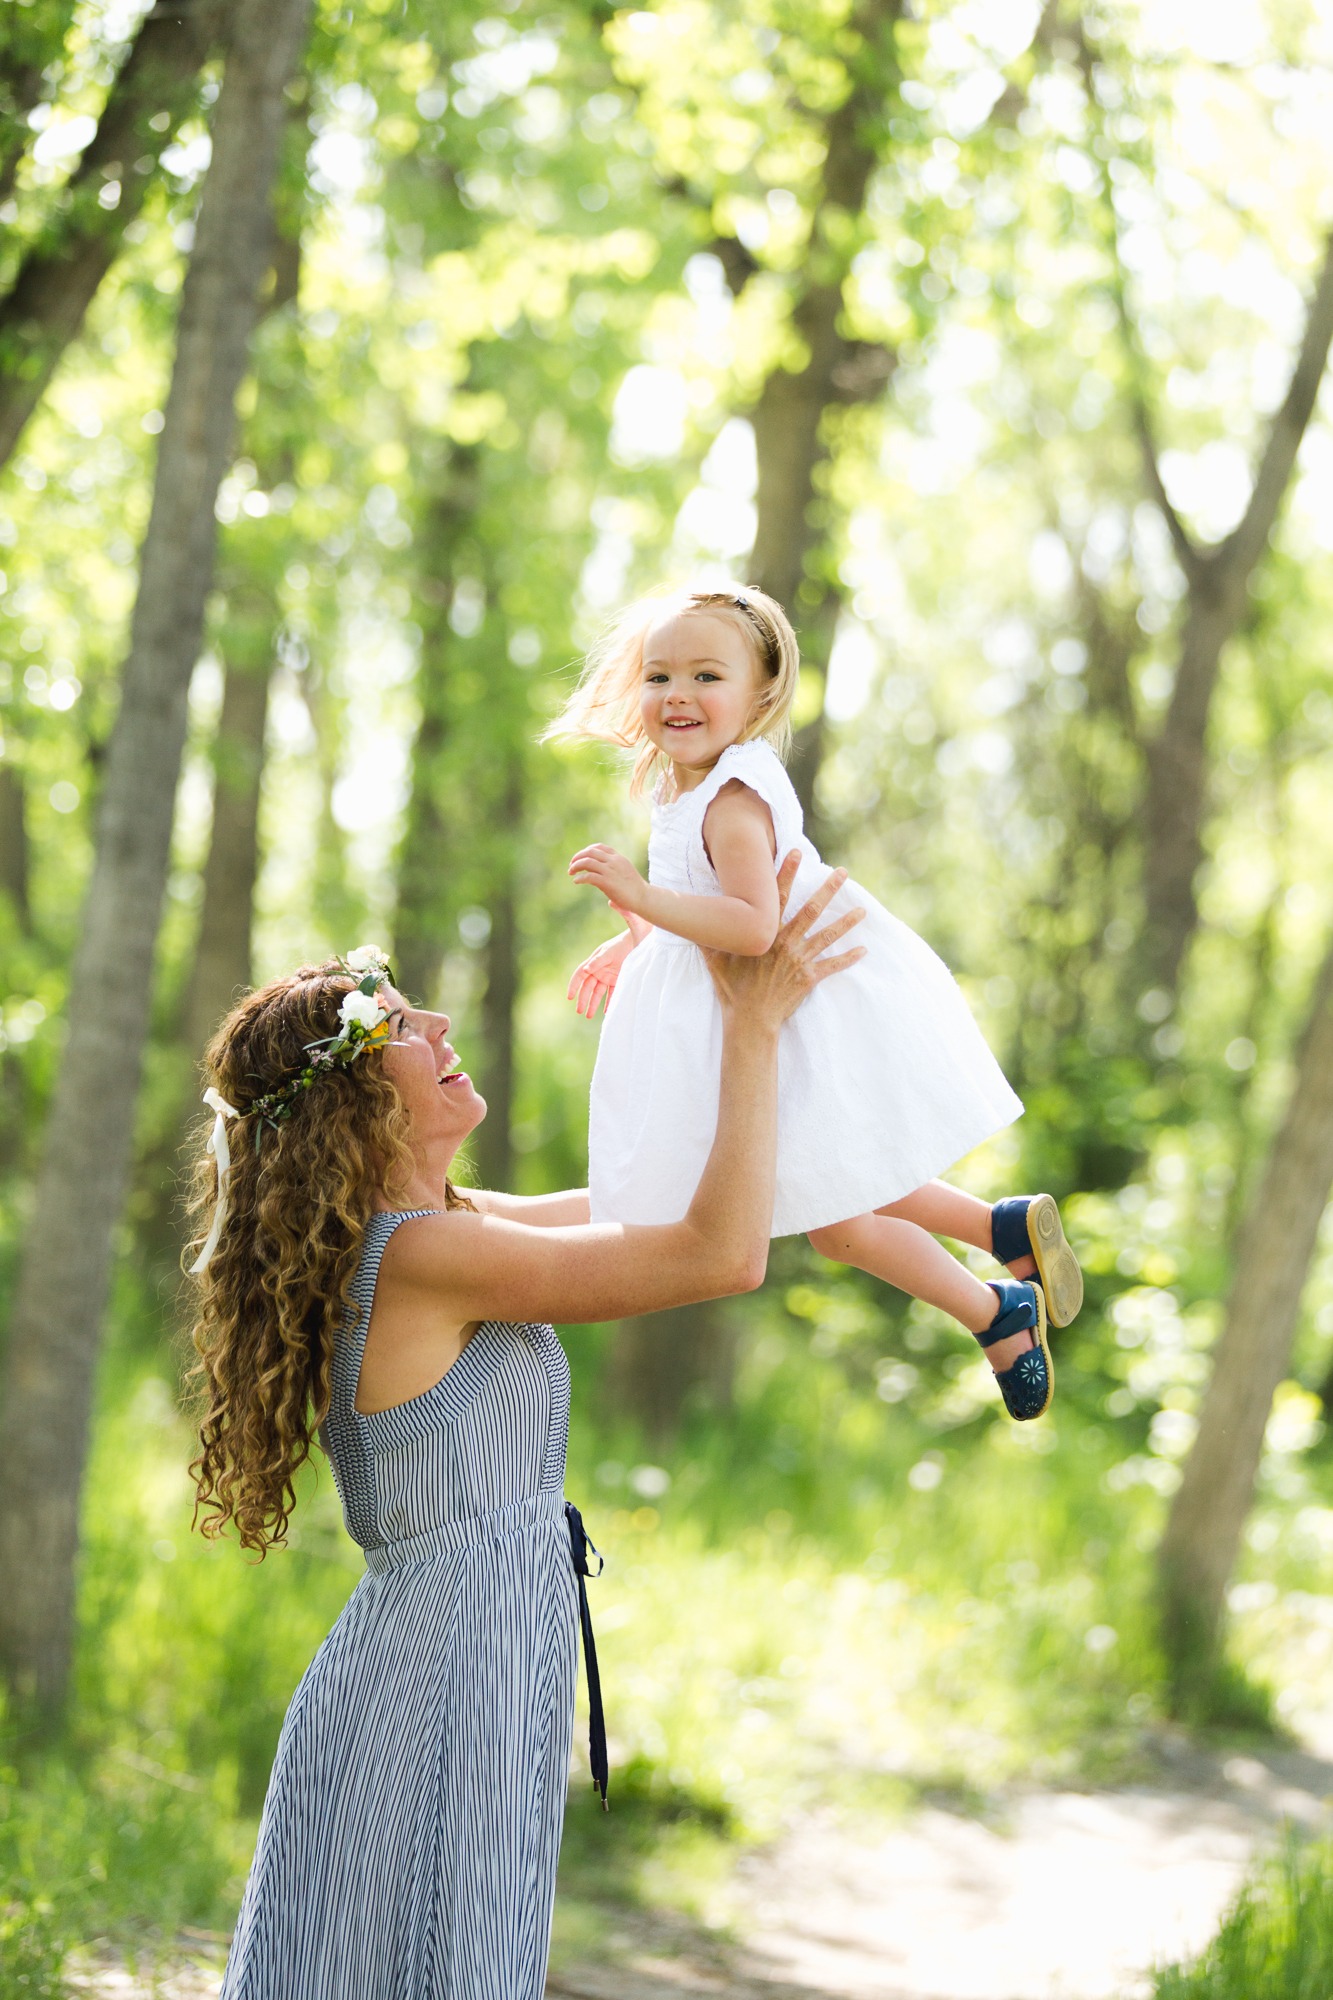 mom lifts young daughter up into the air